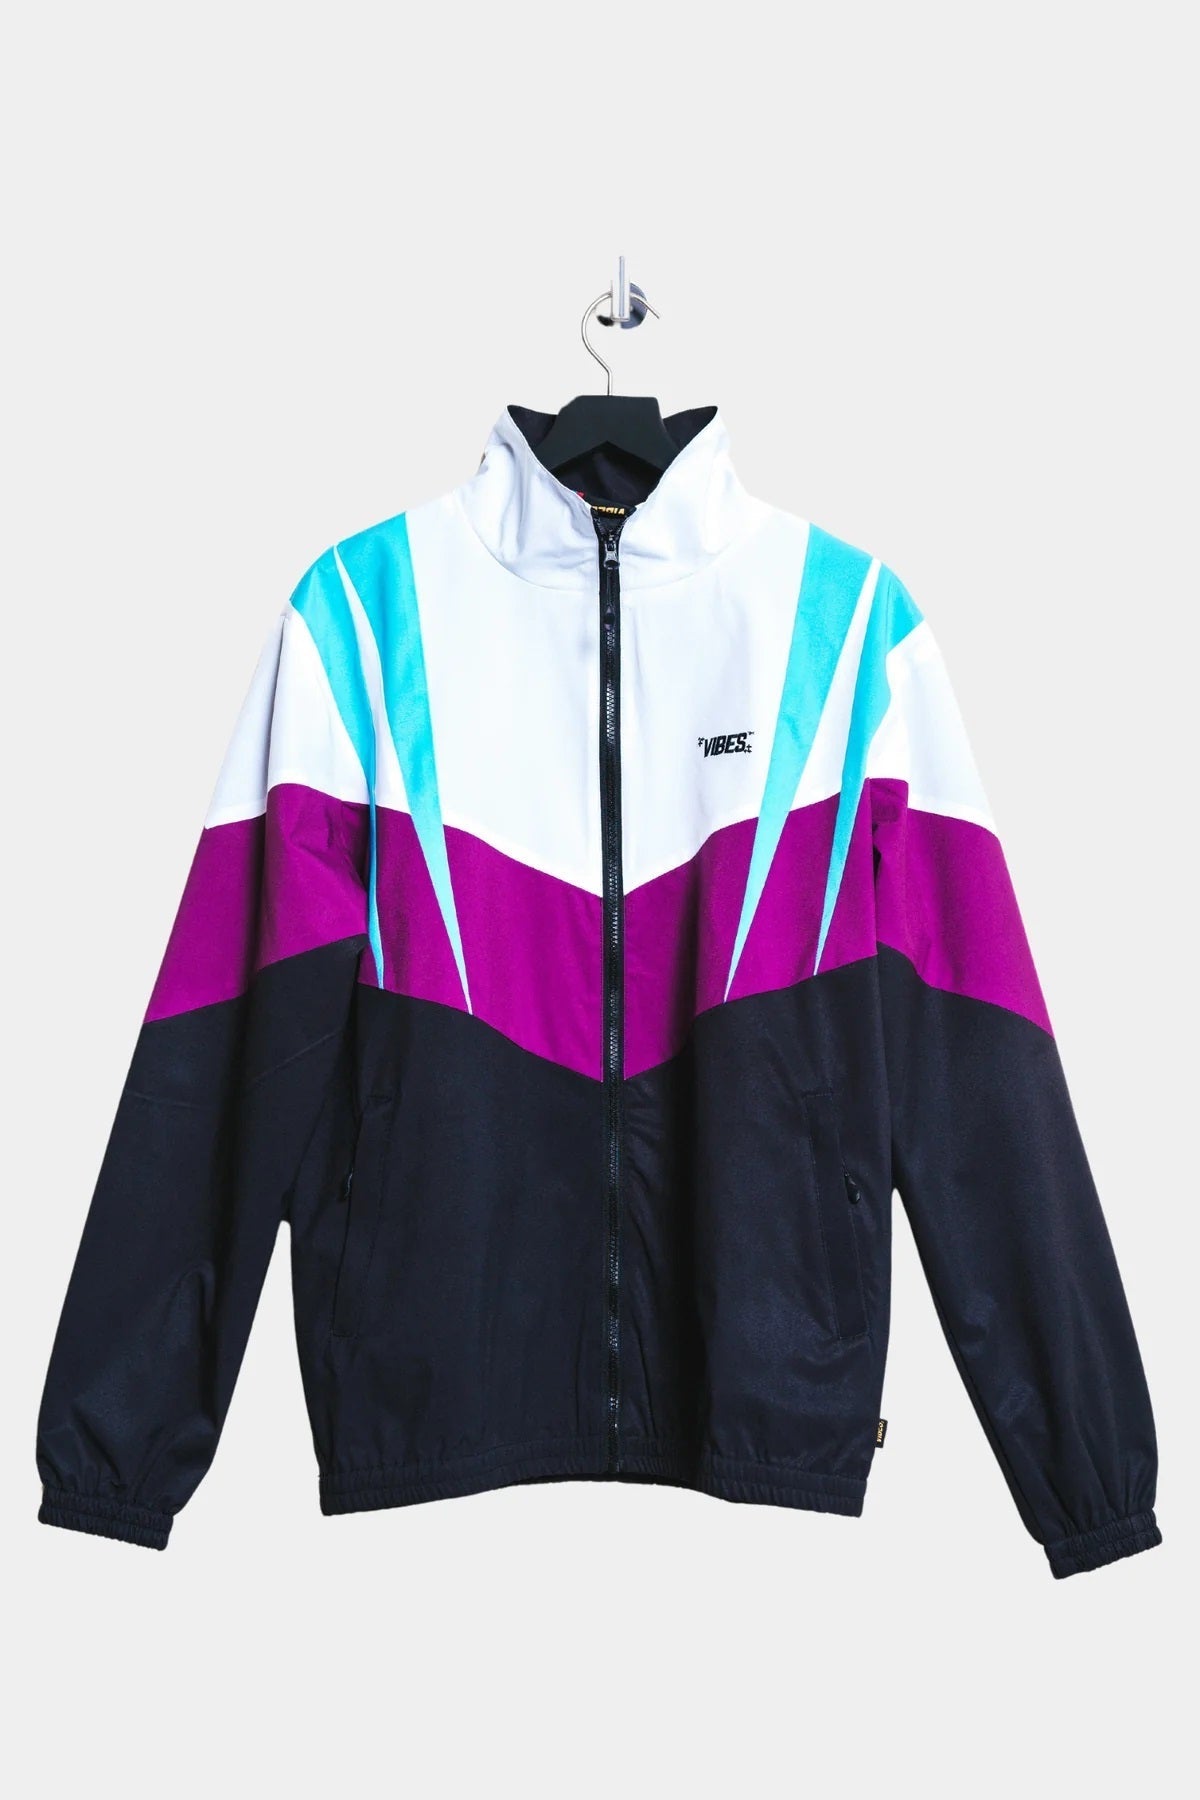 VIBES Black Electric Wind Breaker Small